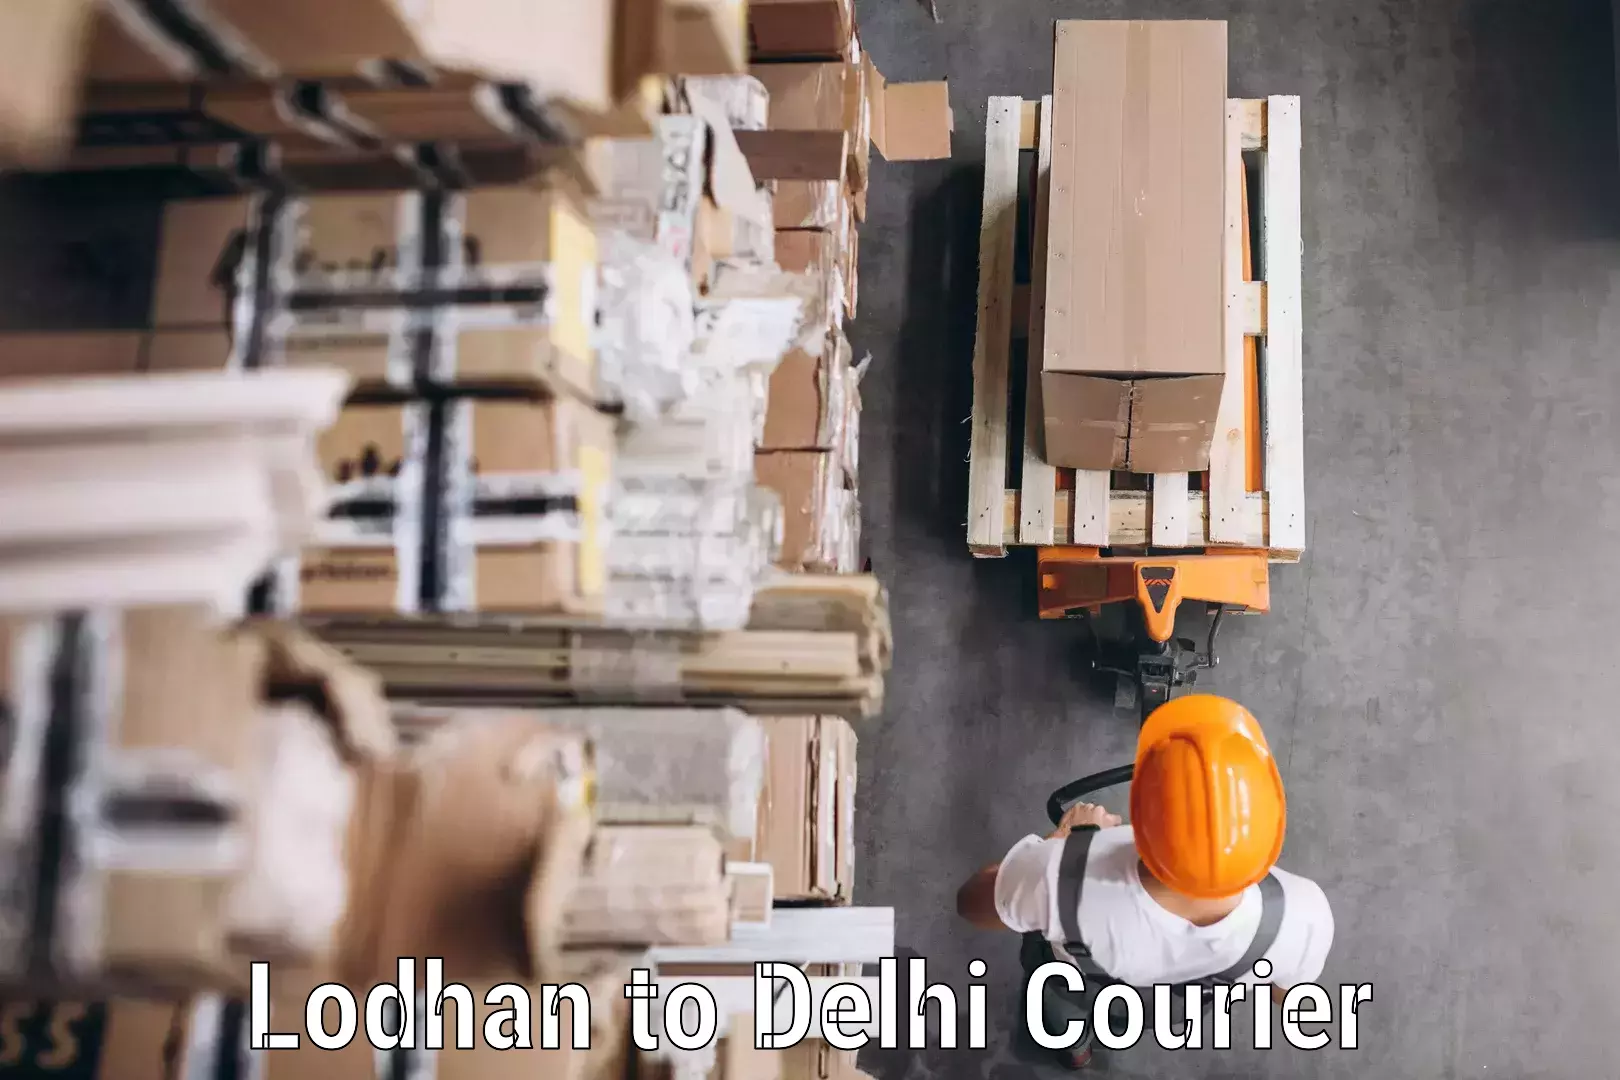 24-hour delivery options Lodhan to Delhi